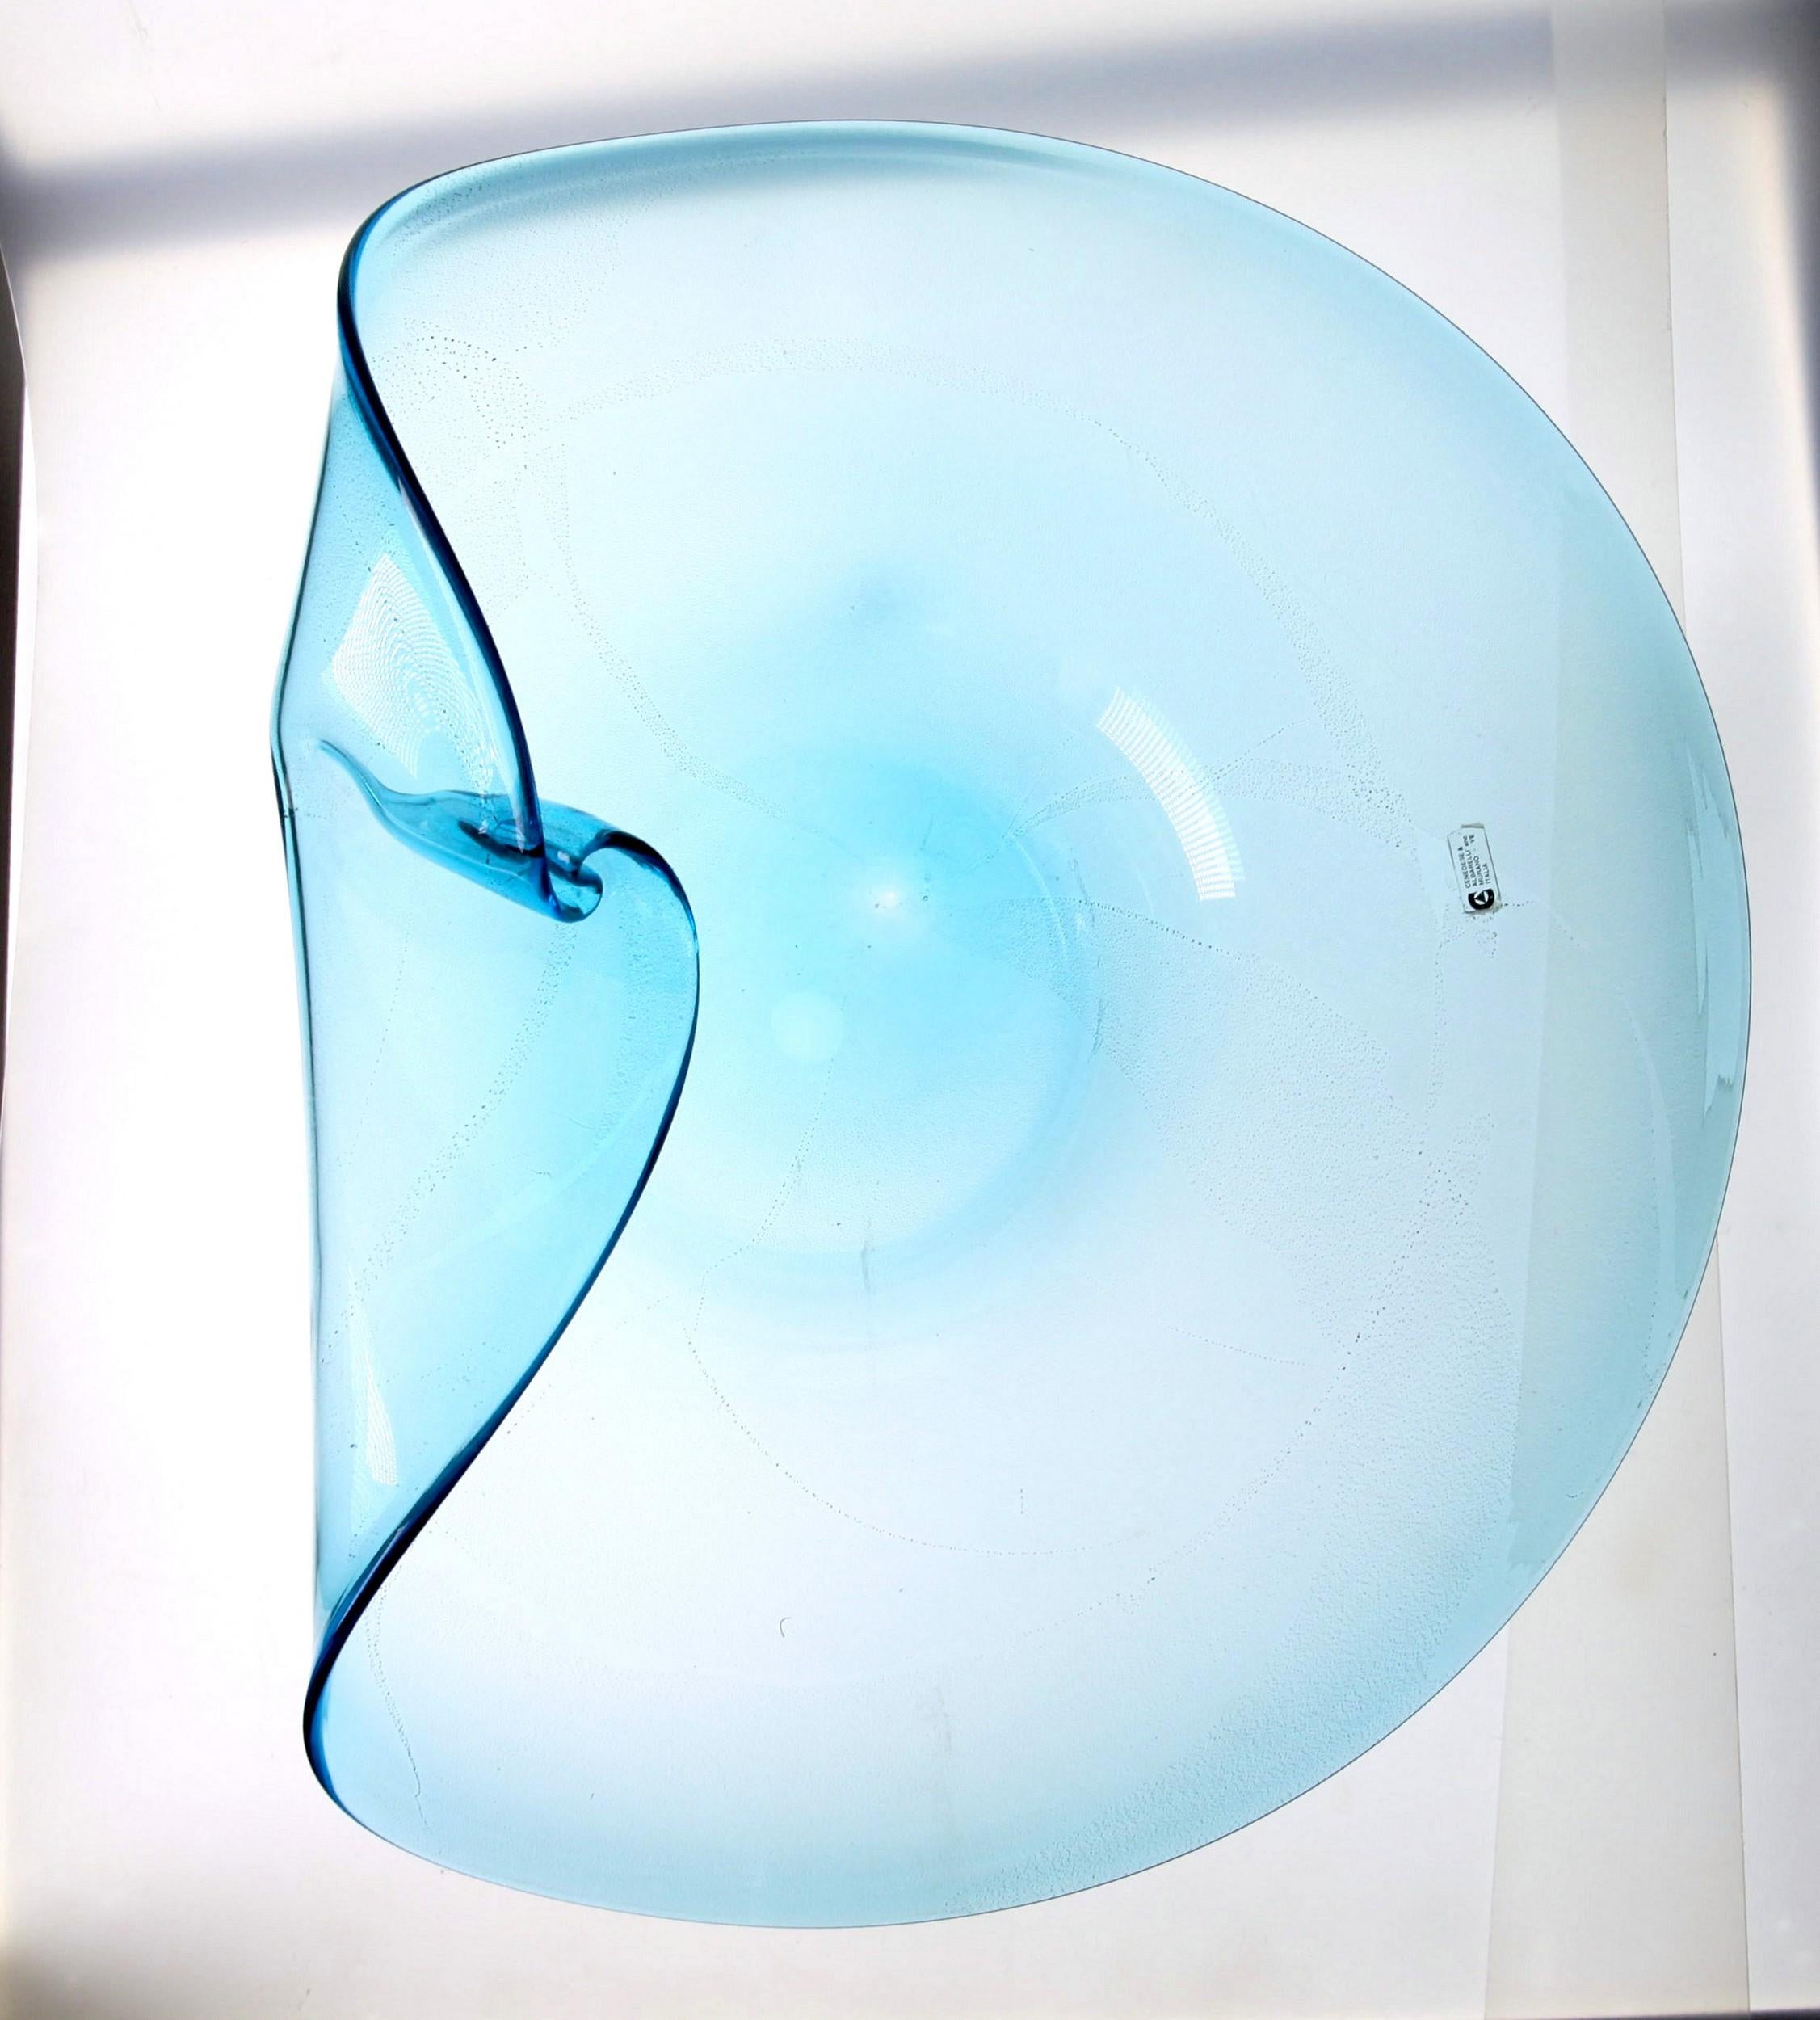 Extraordinary centerpiece in light aquamarine glass with gold leaf. The shape of the bowl has a swirl on the flap that creates an organic play of curves and light. The whole centerpiece becomes a modern sculpture.

Labelled Cenedese Albarelli. I